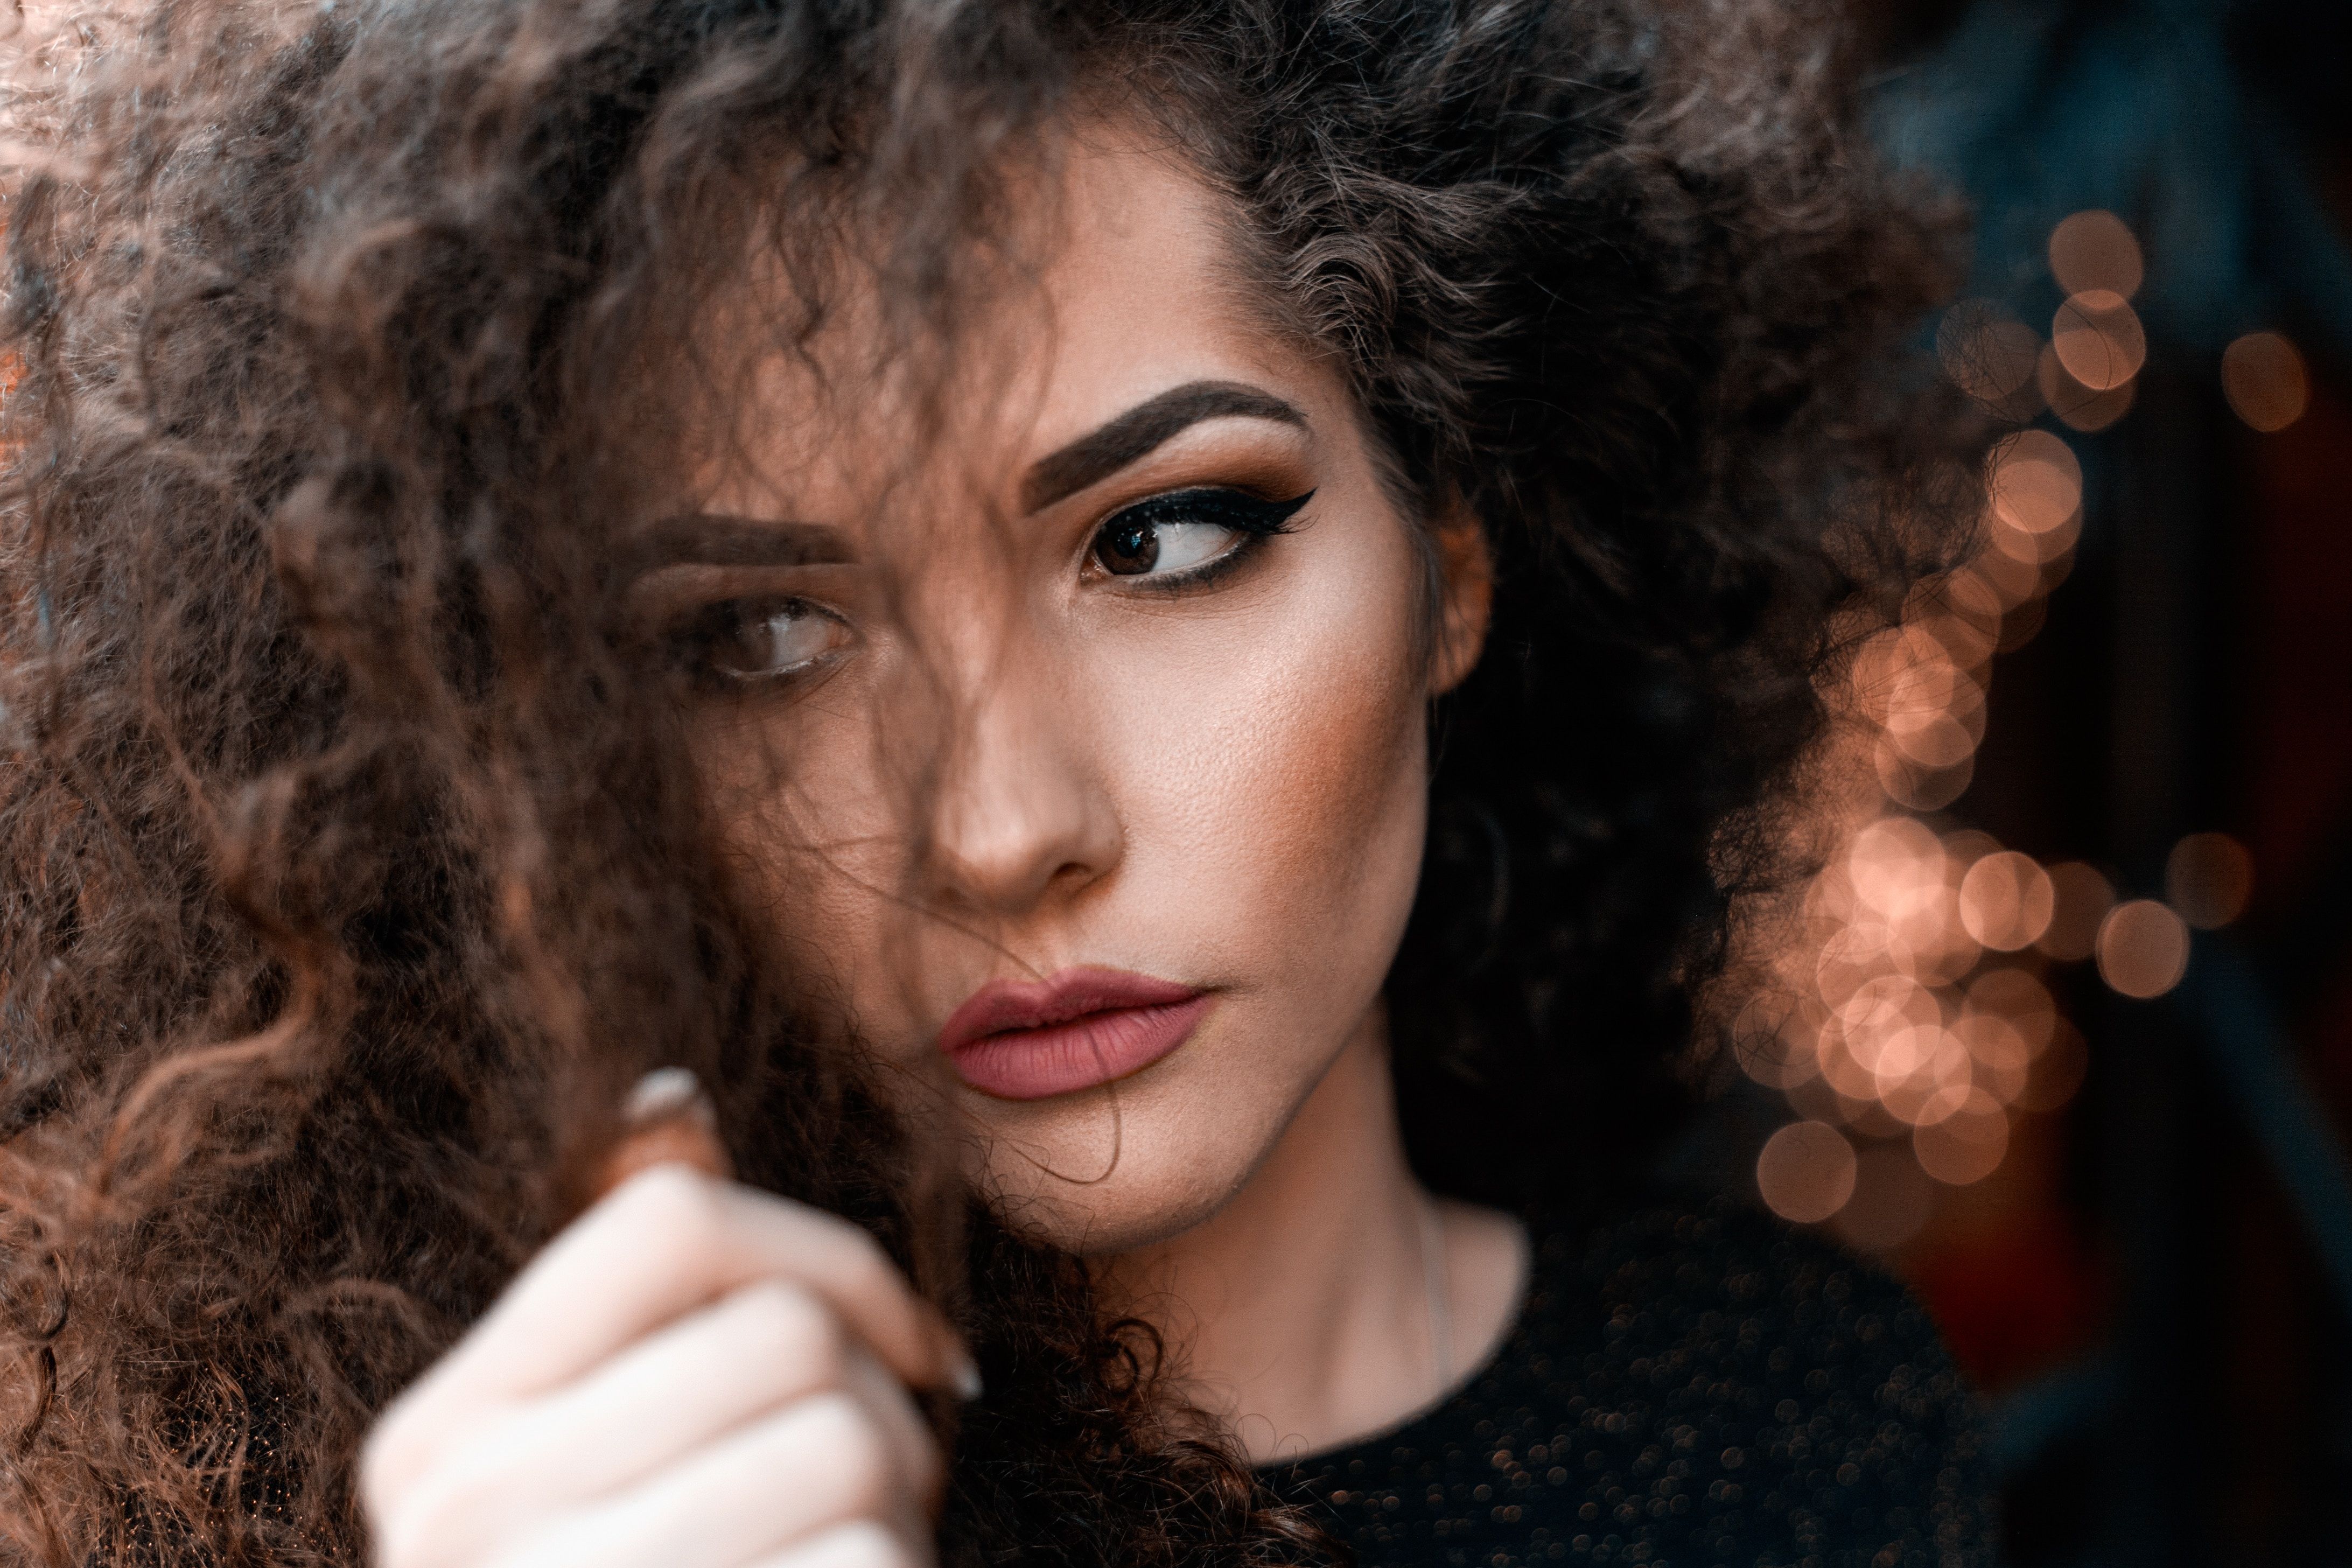 Face Brunette Eyes Lips Nails Eyebrows Curly Hair Women 4368x2912